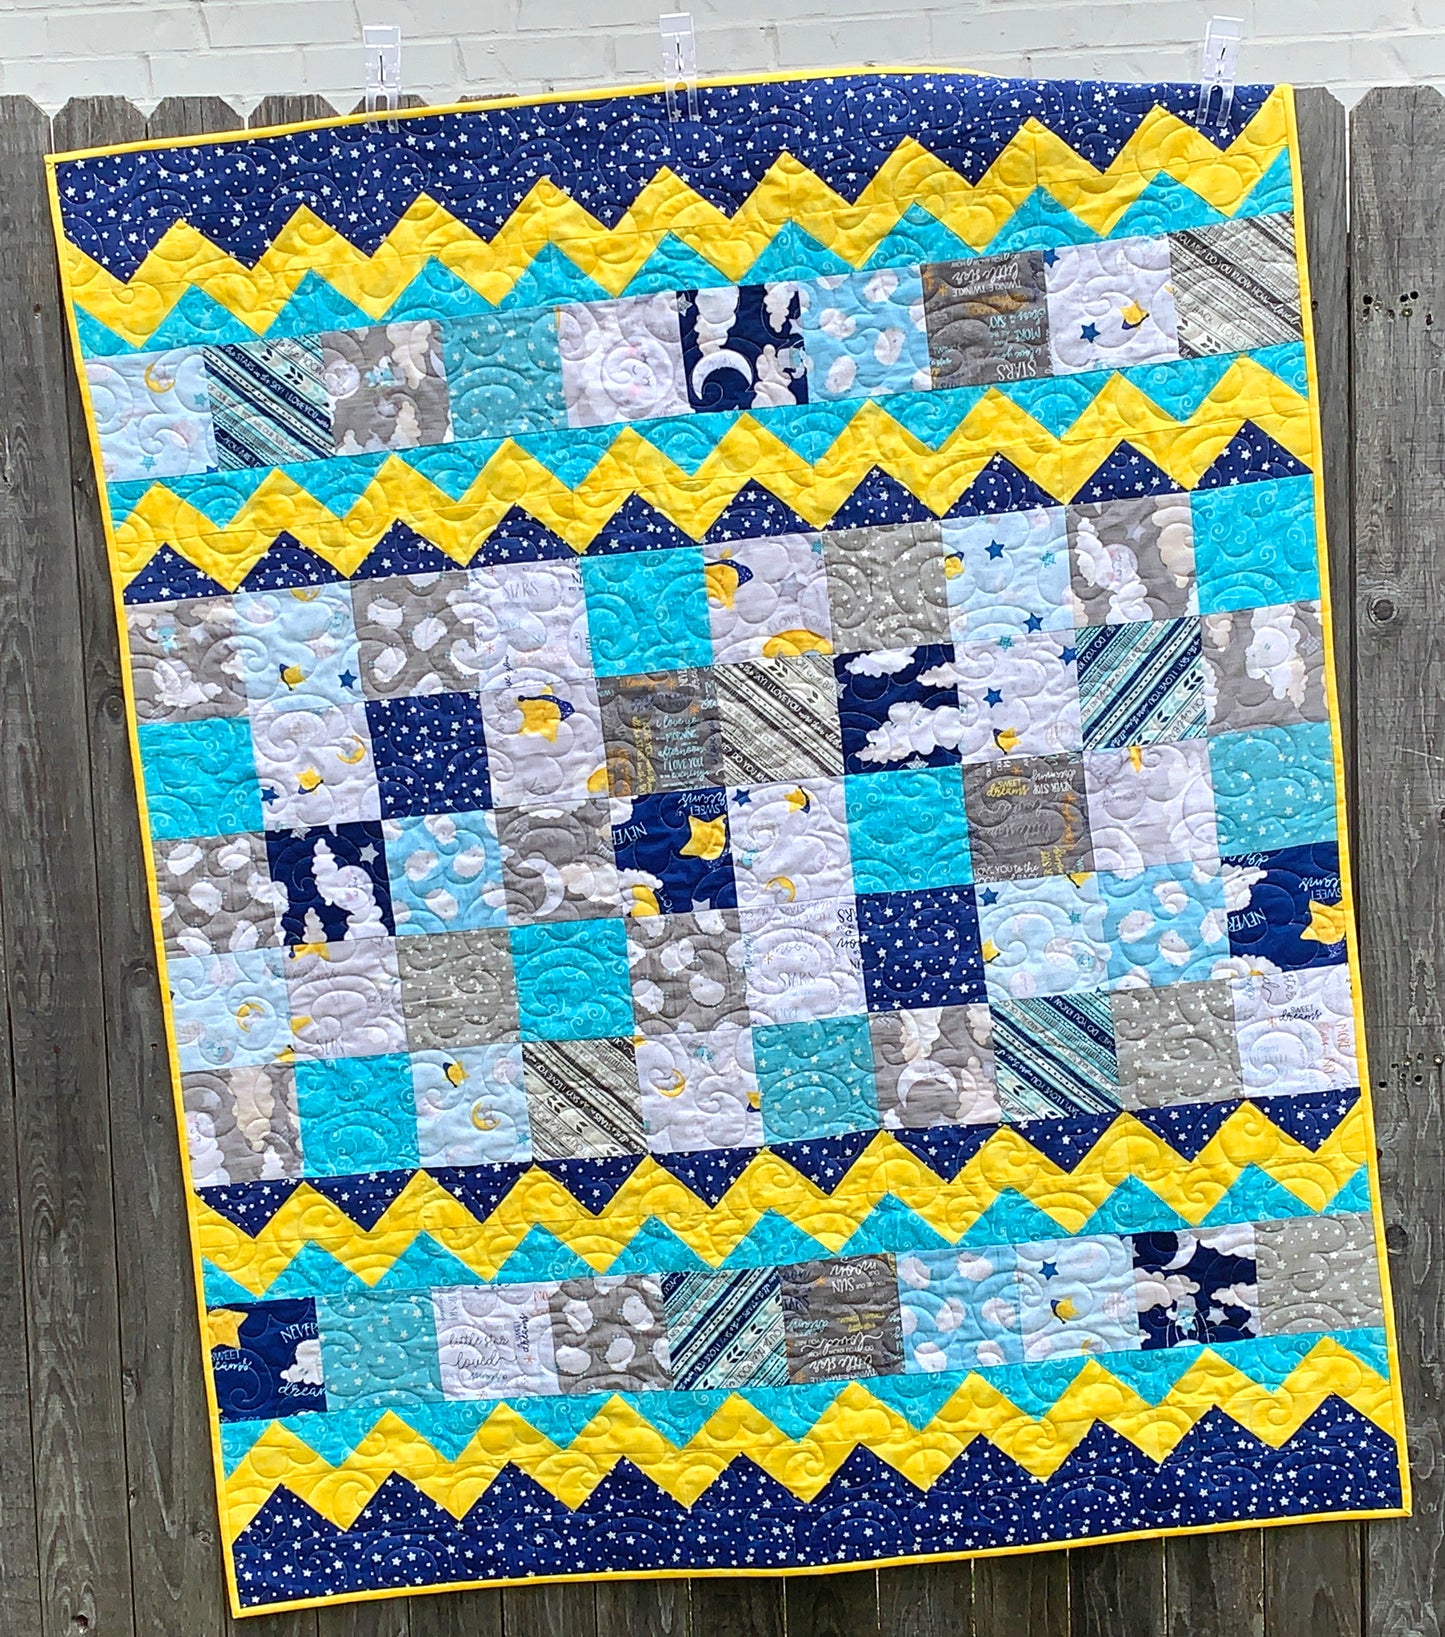 Blue, yellow, teal and gray patchwork baby or toddler quilt with four zig-zag rows accenting the patchwork blocks. Quilt is shown displayed on a fence.